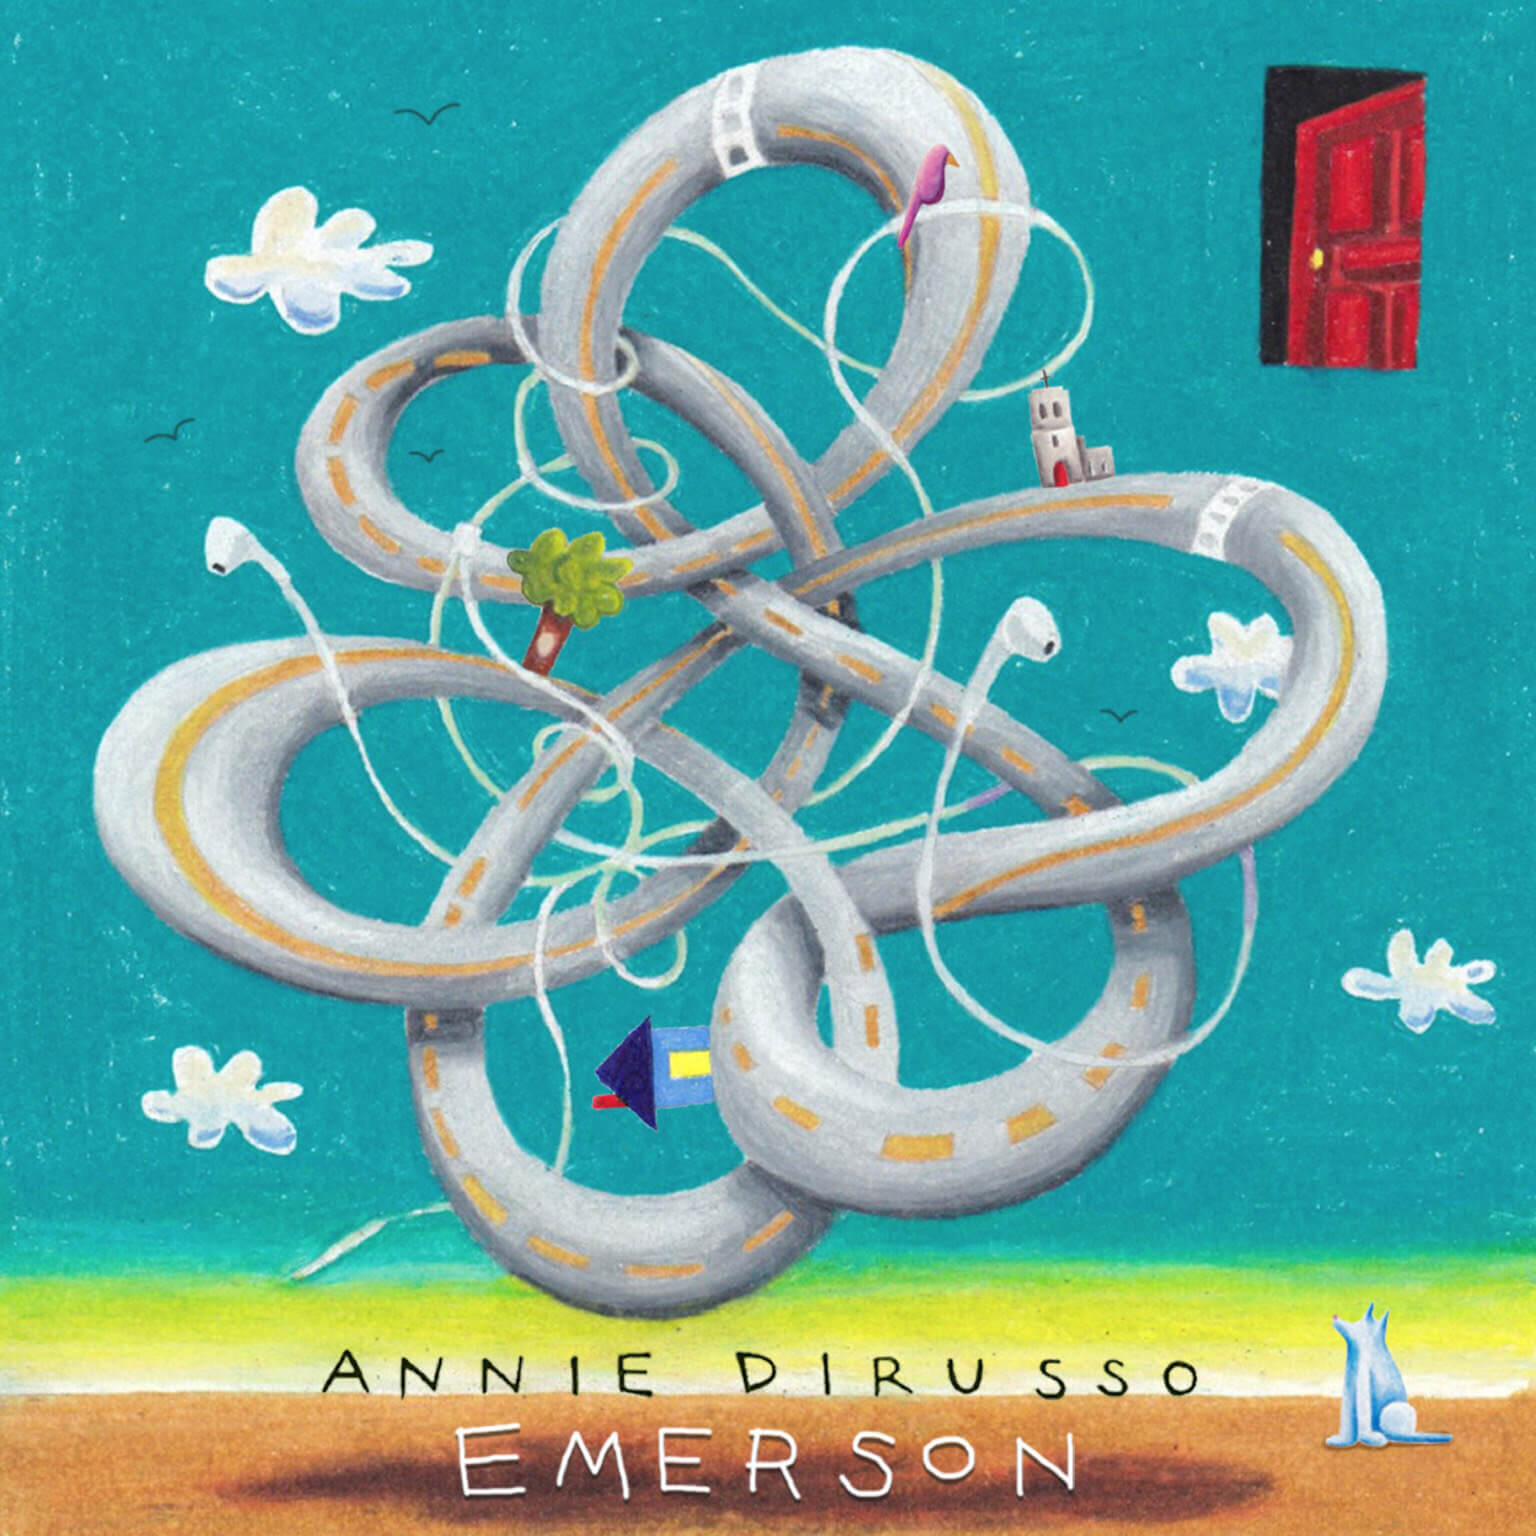 "Emerson" by Annie DiRusso is Northern Transmissions Song of the Day